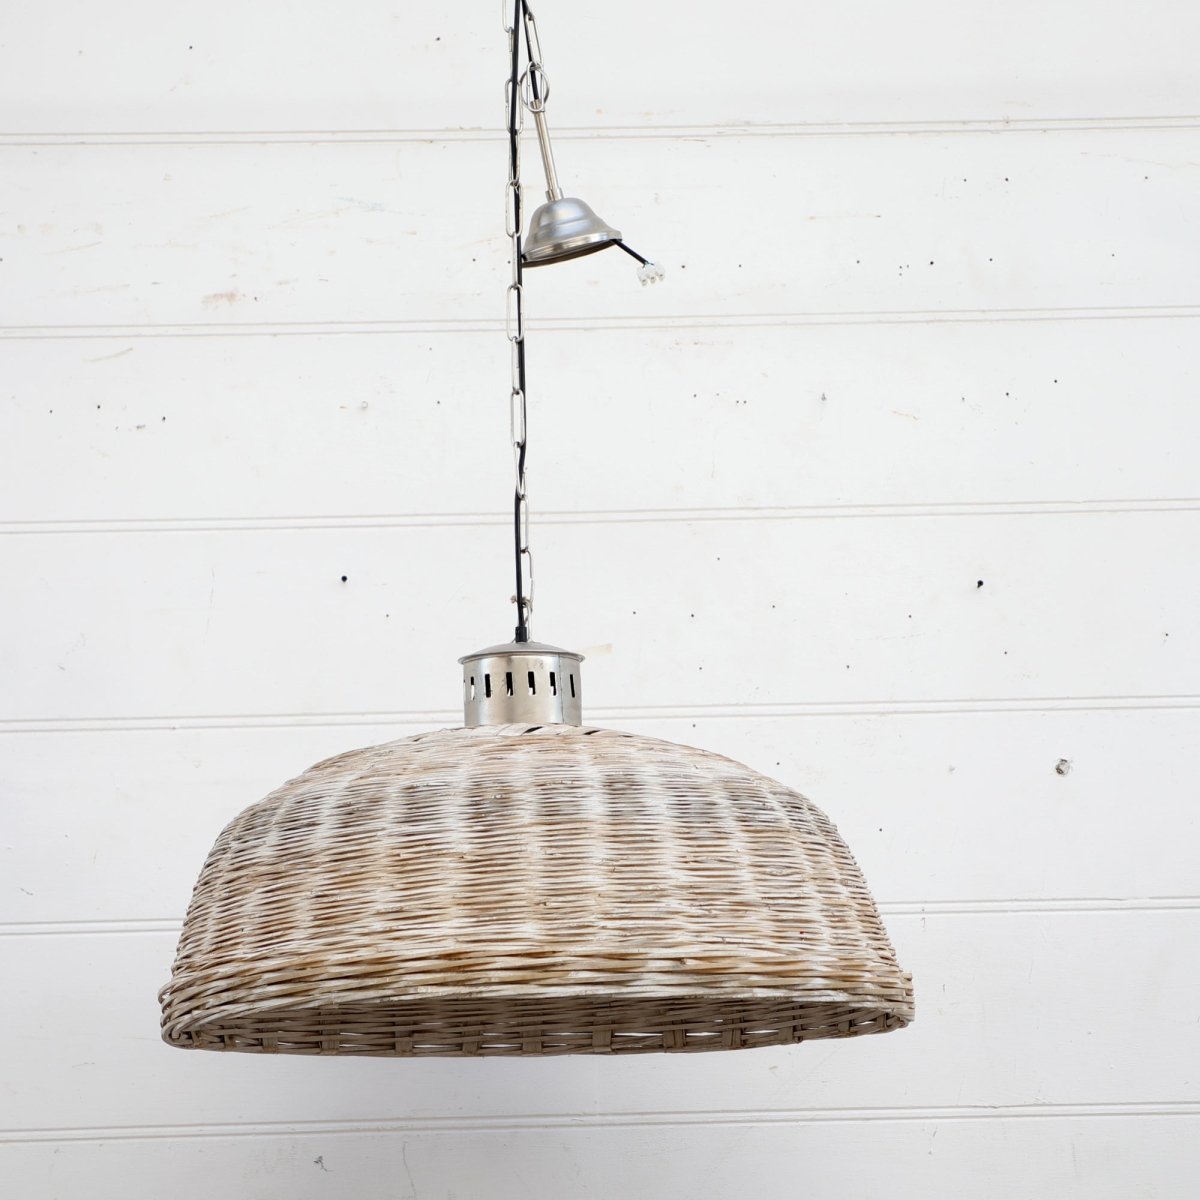 Bamboo wooden ceiling lamp - Rustic Furniture Outlet